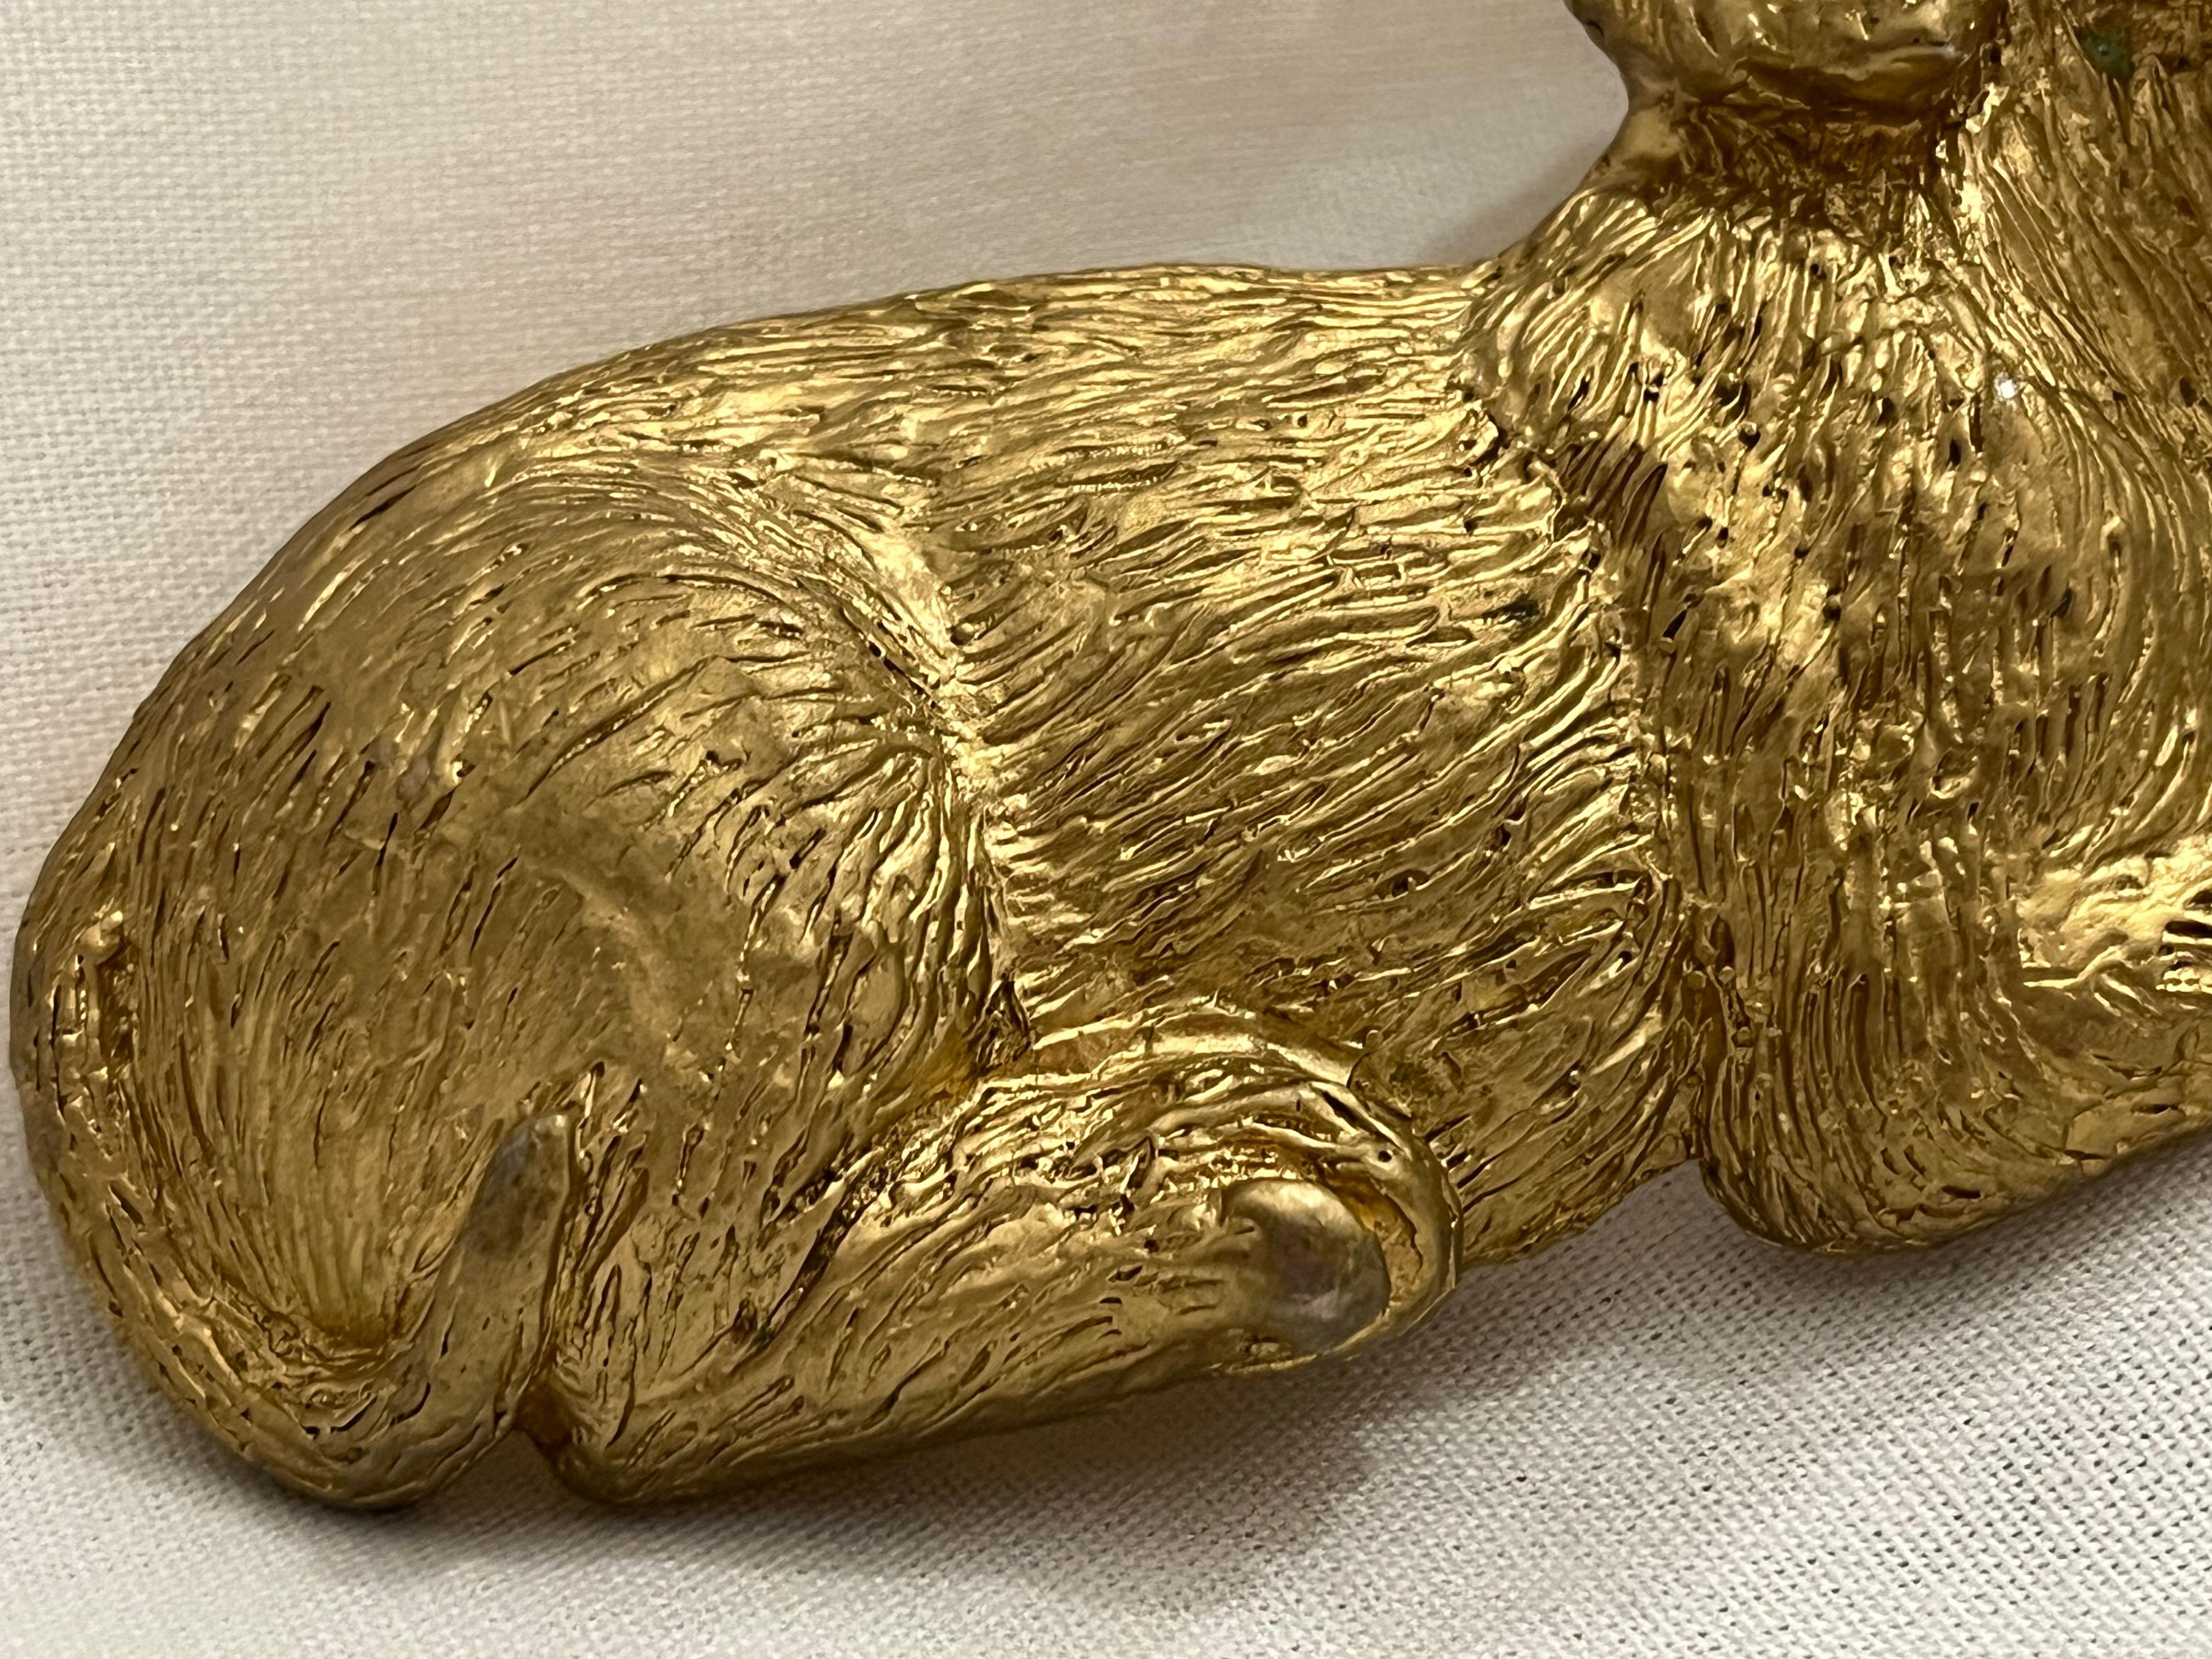 Vintage 1992 Mimi Di Niscemi Signed Golden Dachshund Belt Buckle with Brown Eyes For Sale 7